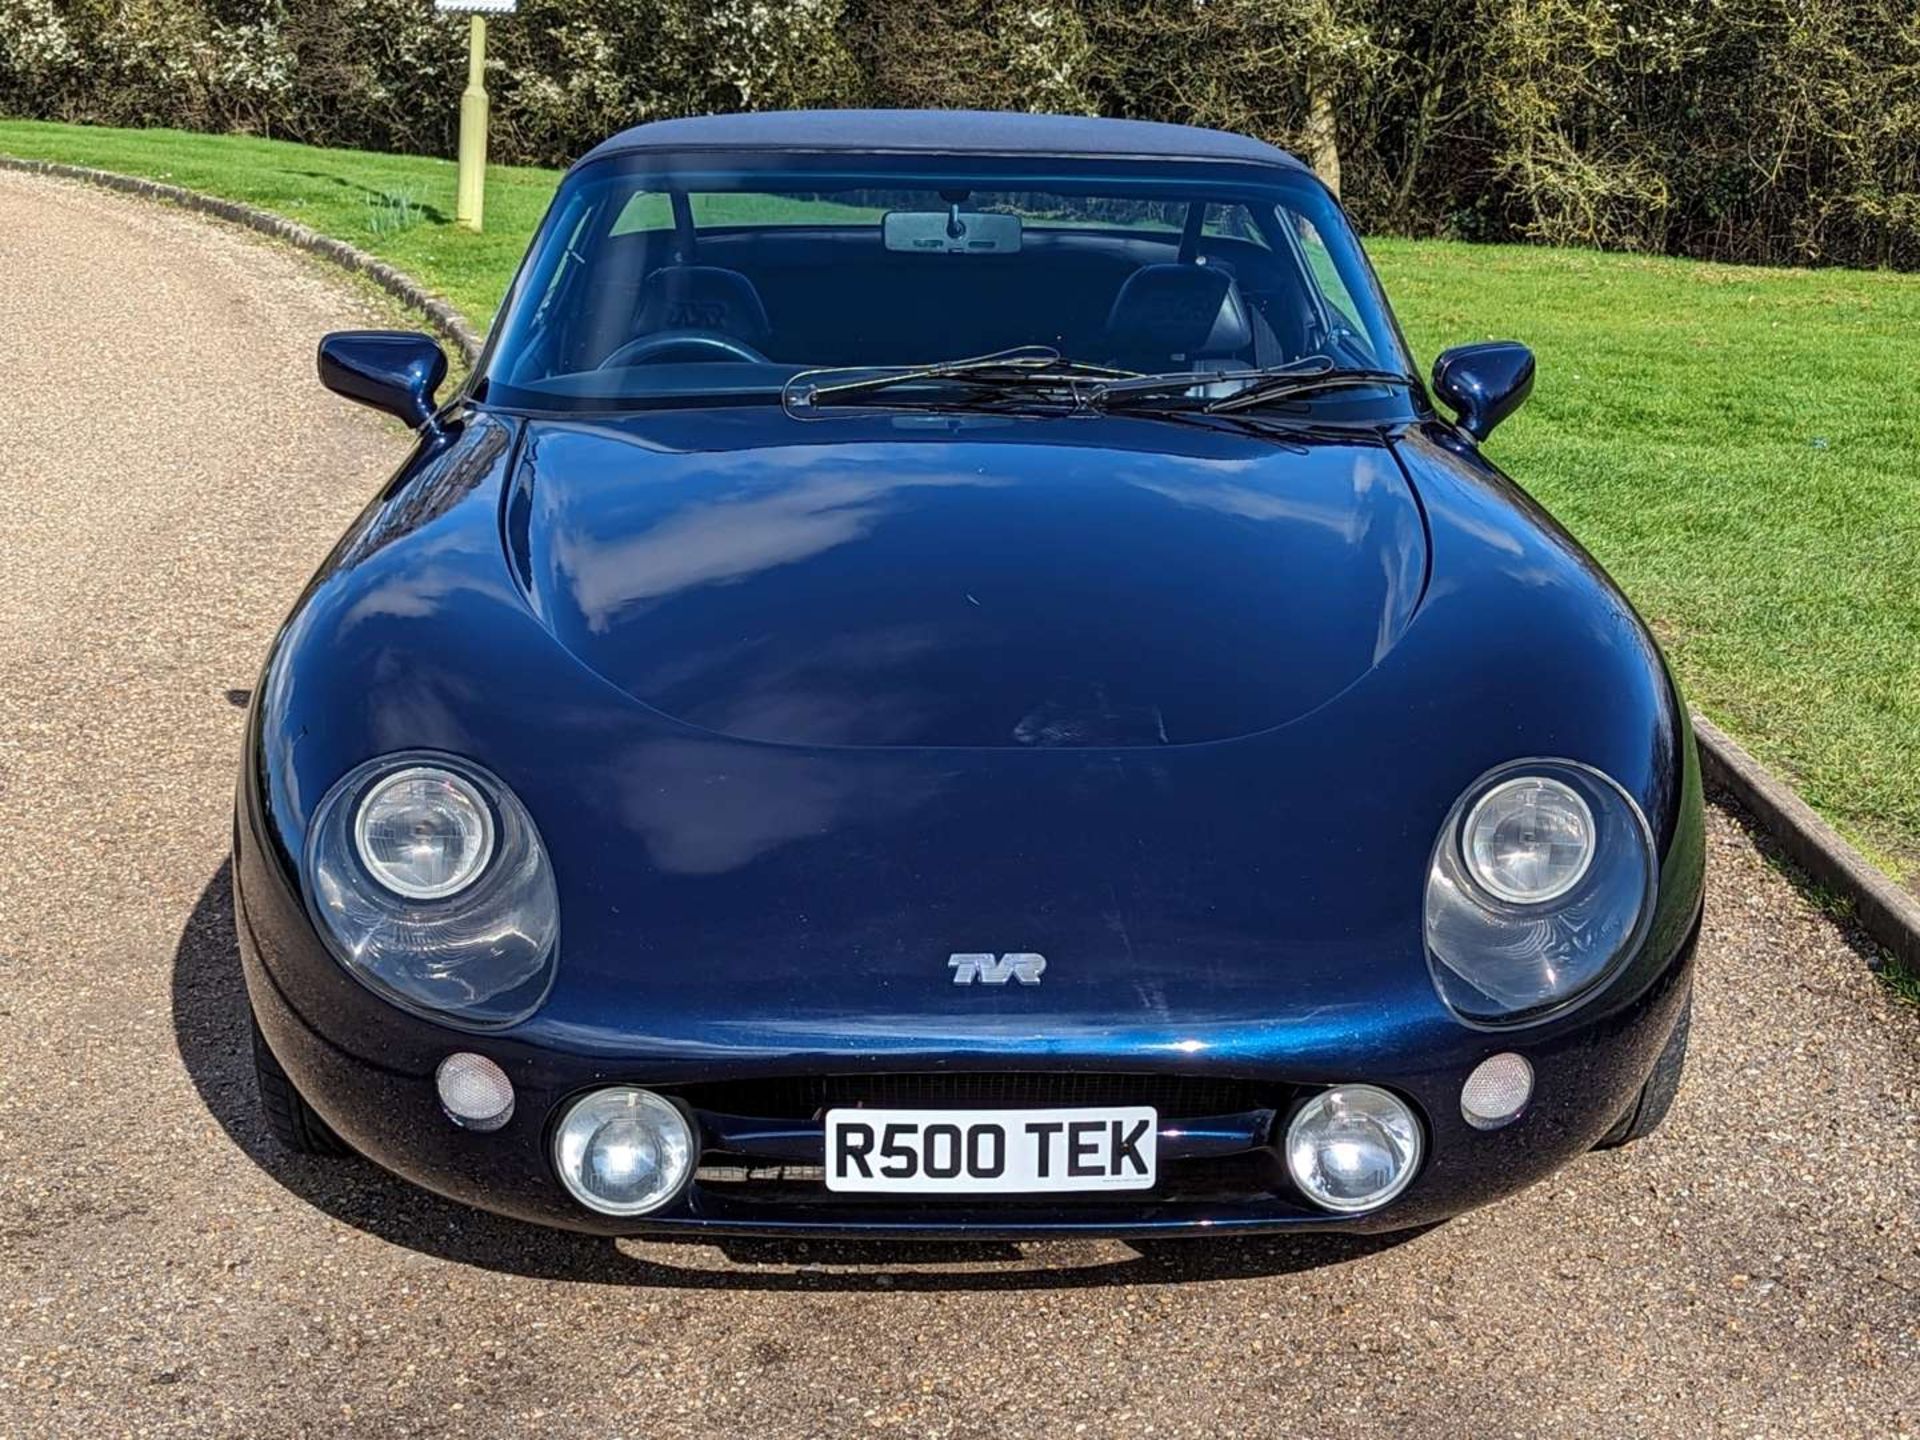 1997 TVR GRIFFITH 5.0 - Image 3 of 29